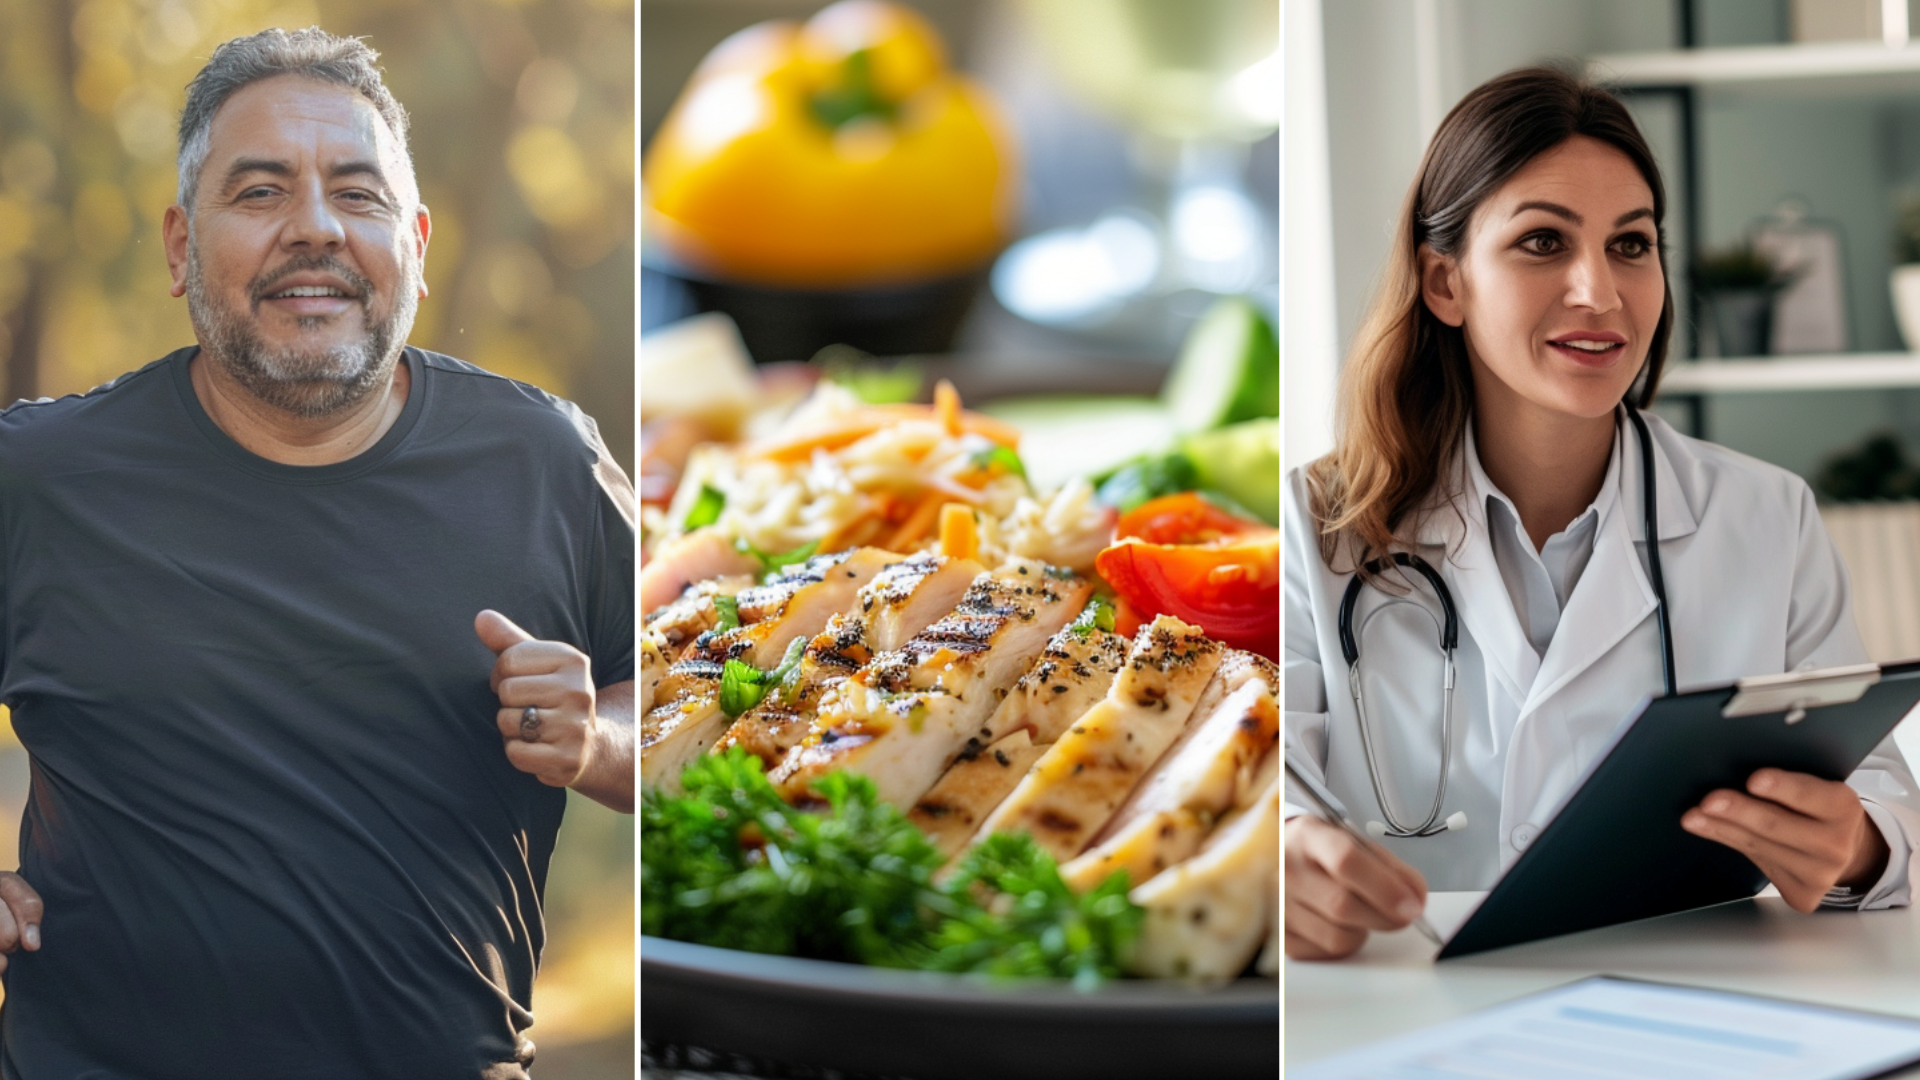 create an image of a doctor wearing a white coat and holding a clipboard, seated at the table inside the clinic while talking to the patient a hispanic man slightly overweight mid 30-40years running position, outdoor park. create an image of healthy keto plate on a dinner table